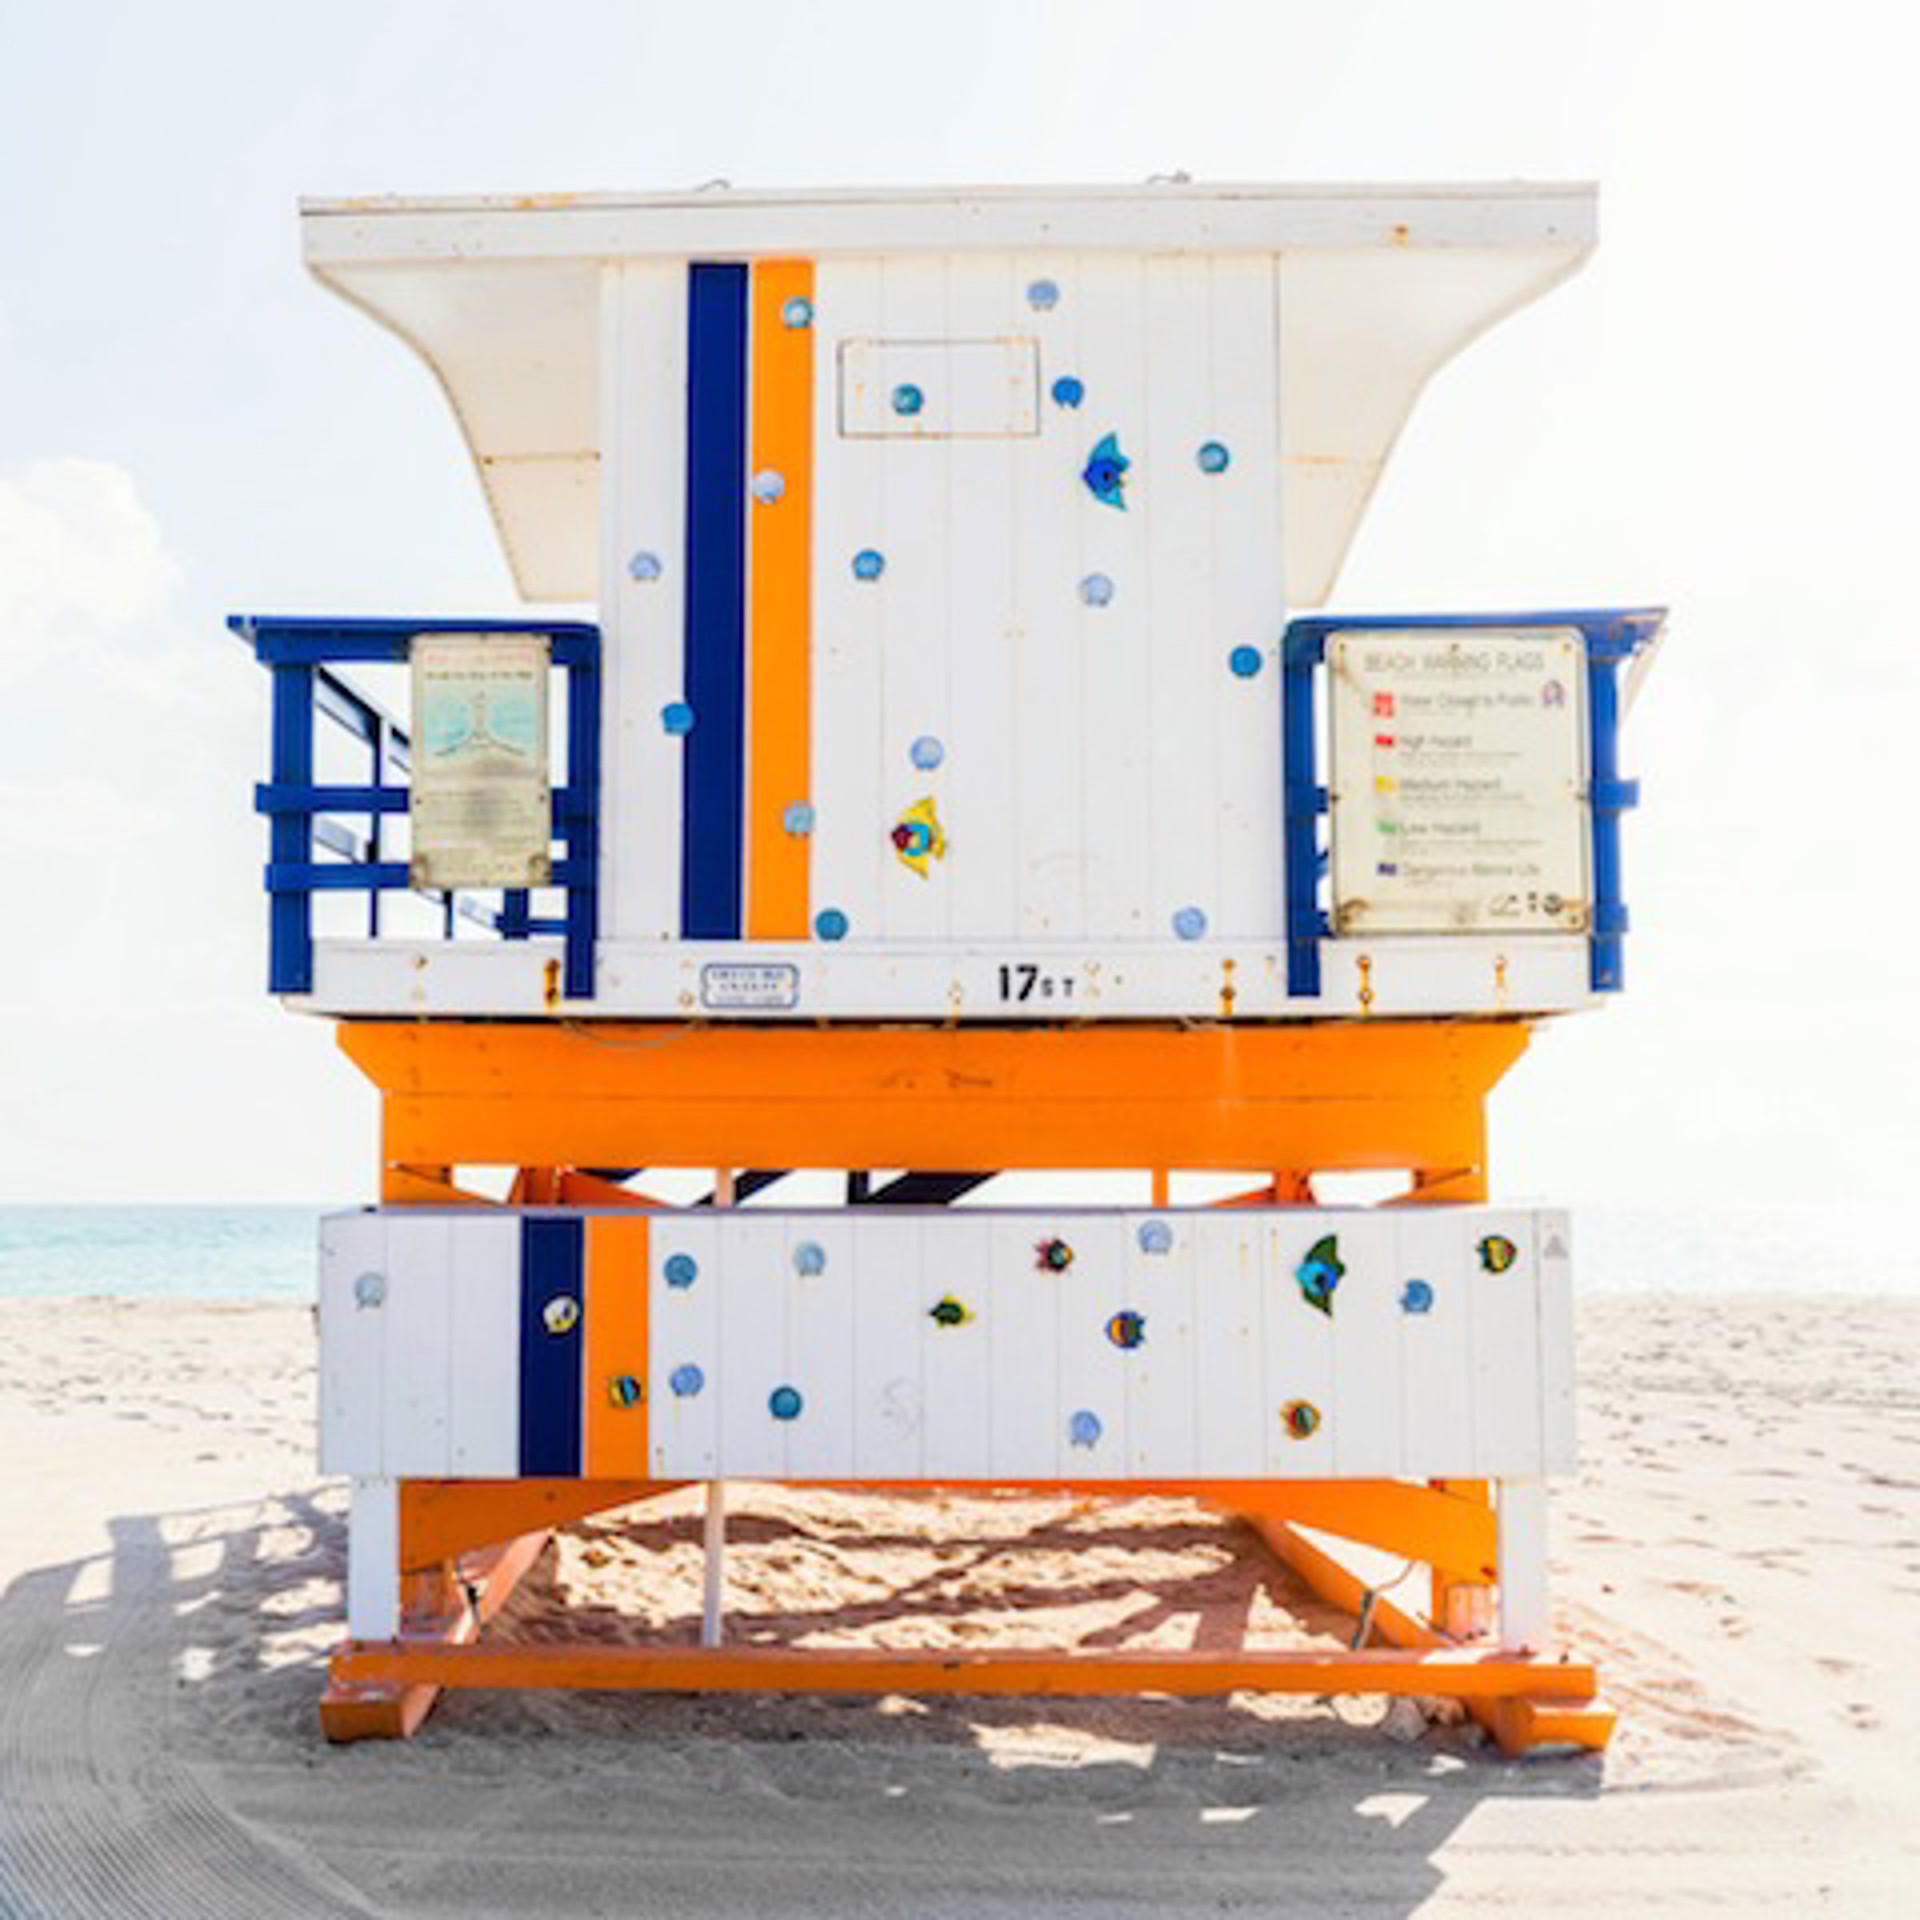 17th Street Lifeguard Stand, Rear View by Peter Mendelson